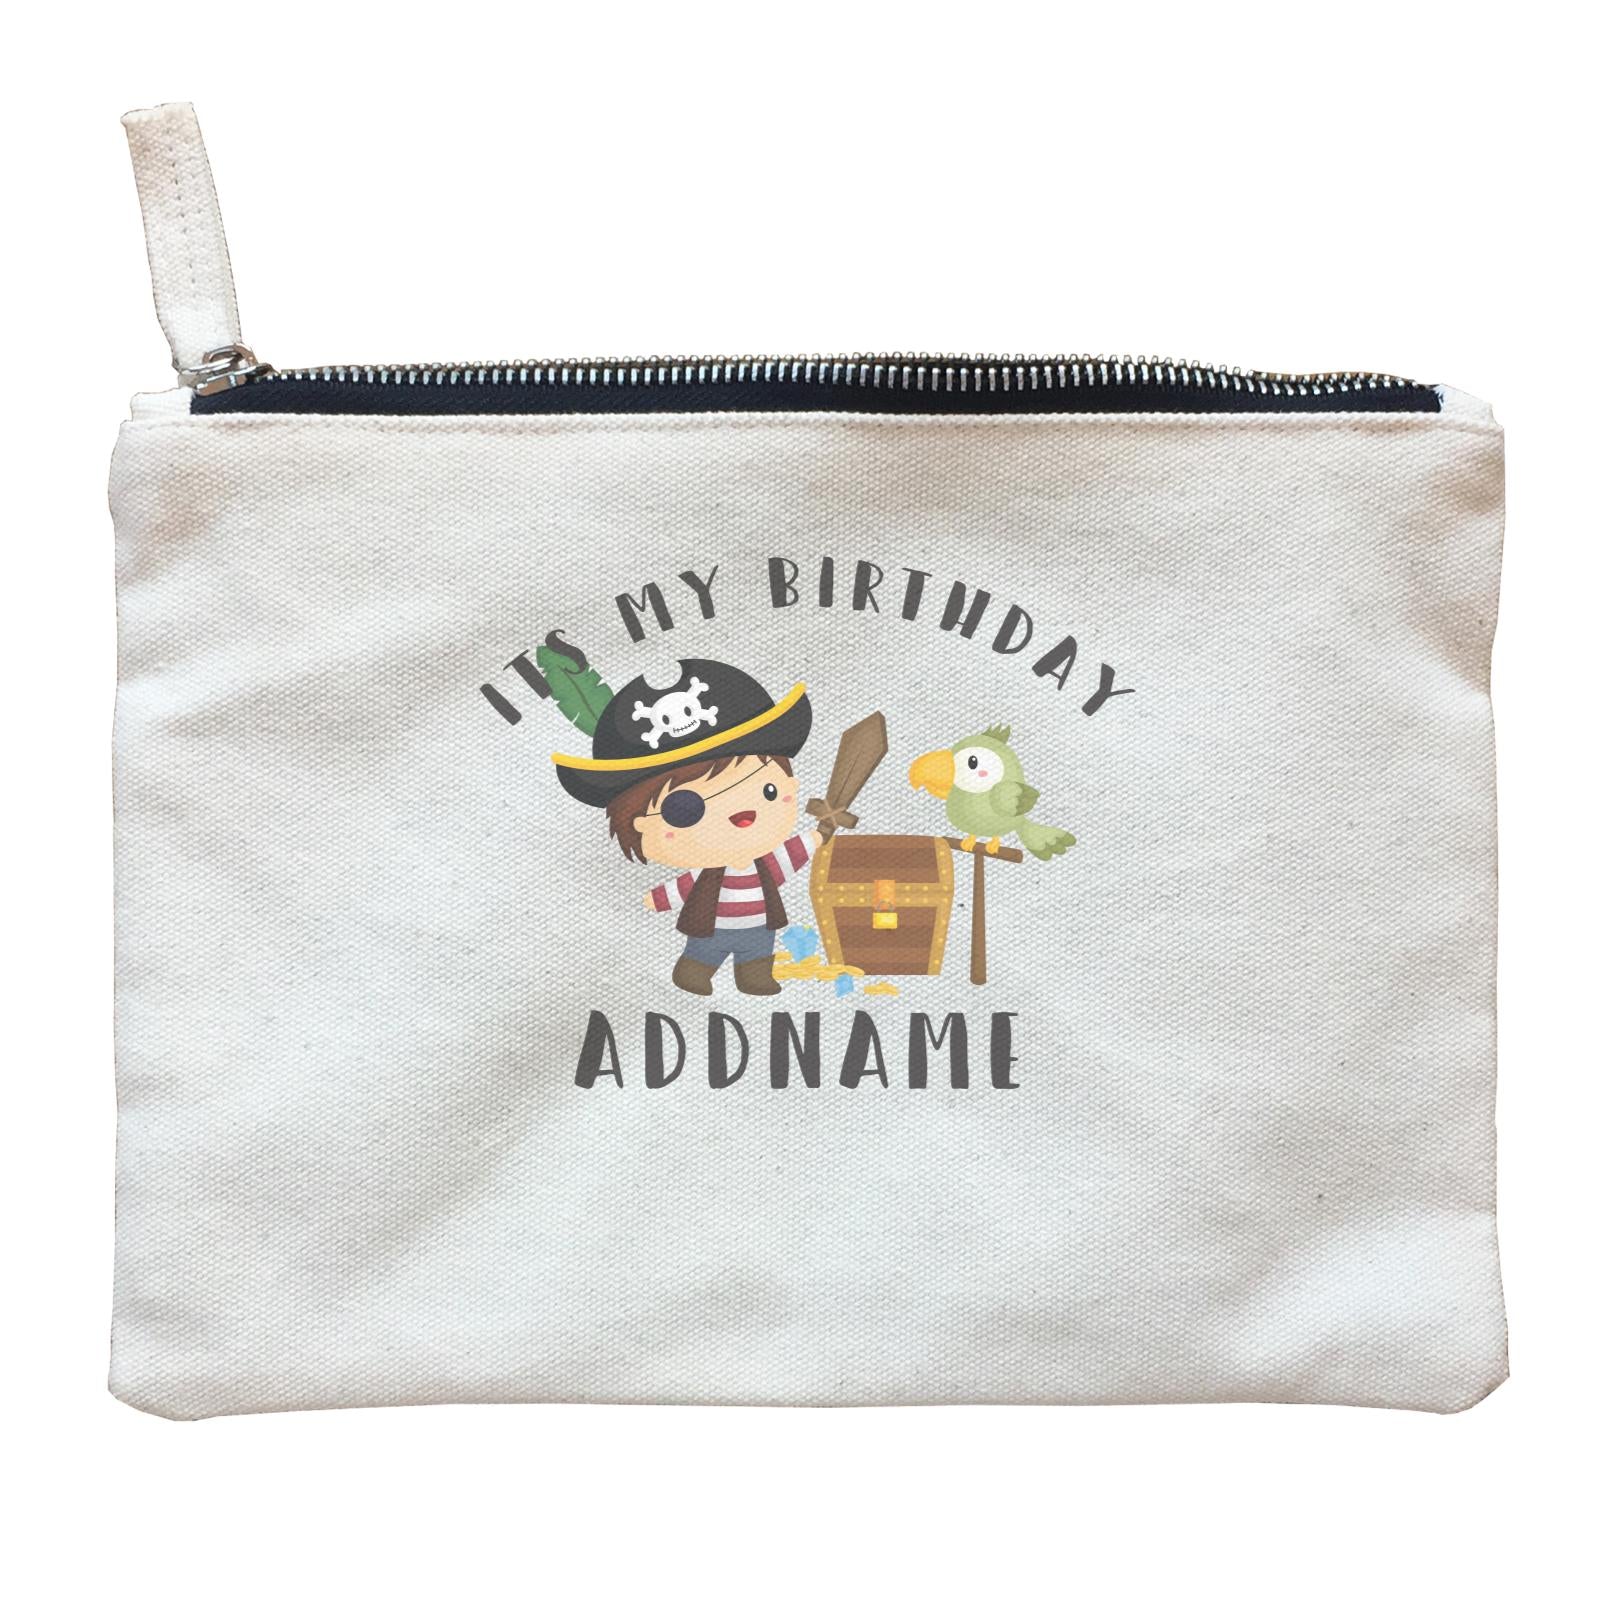 Birthday Pirate Happy Boy Captain With Treasure Chest Its My Birthday Addname Zipper Pouch